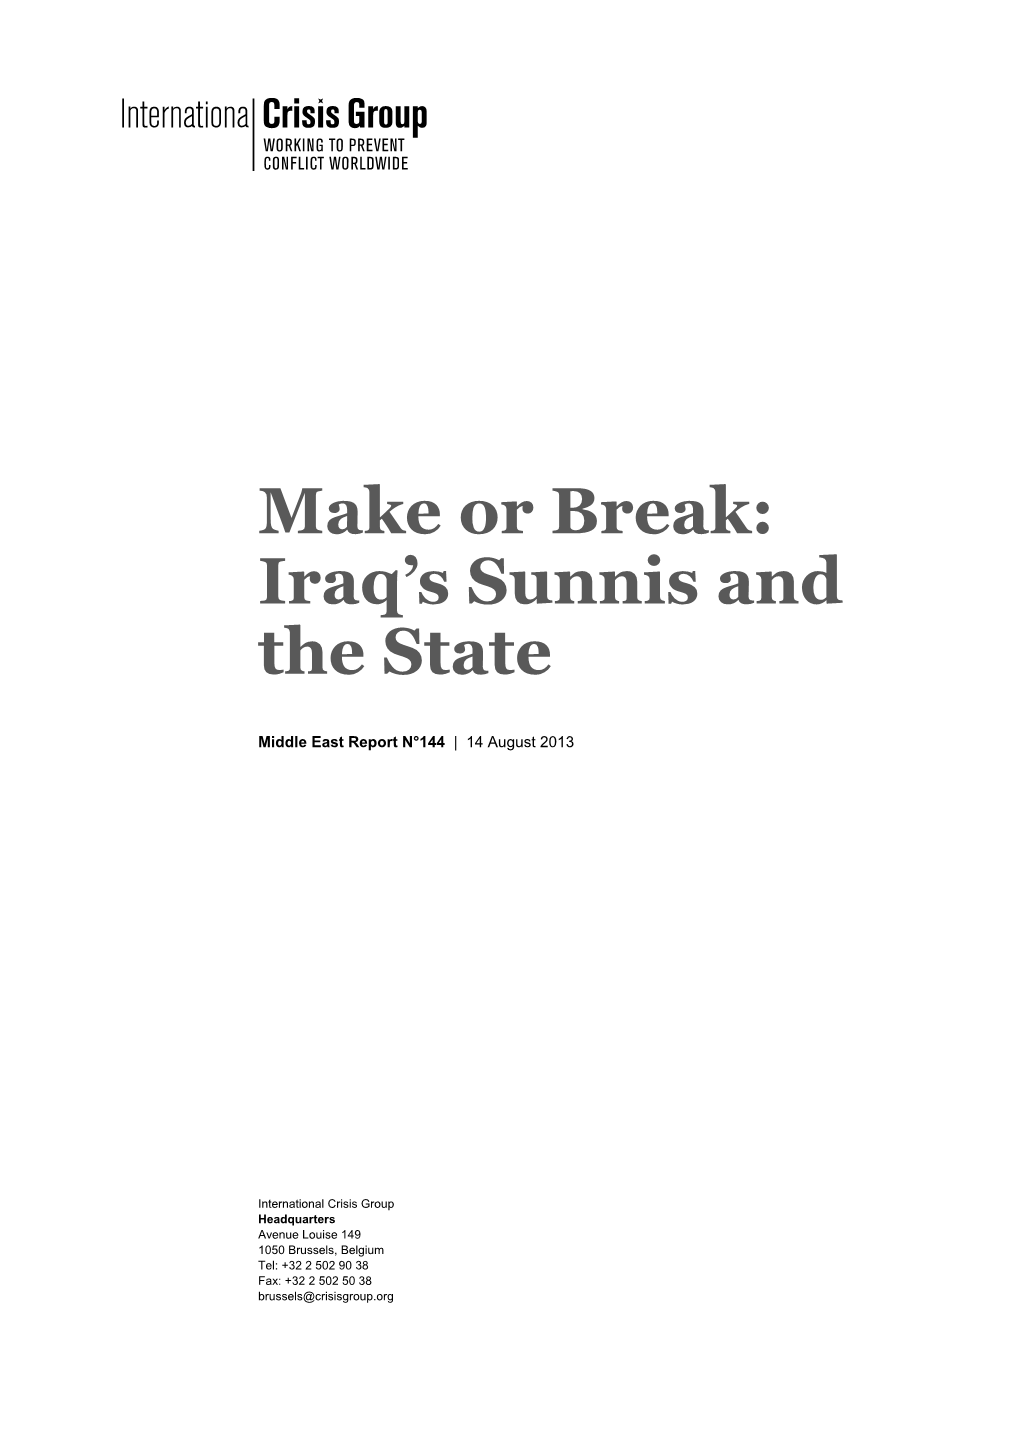 Make Or Break: Iraq's Sunnis and the State